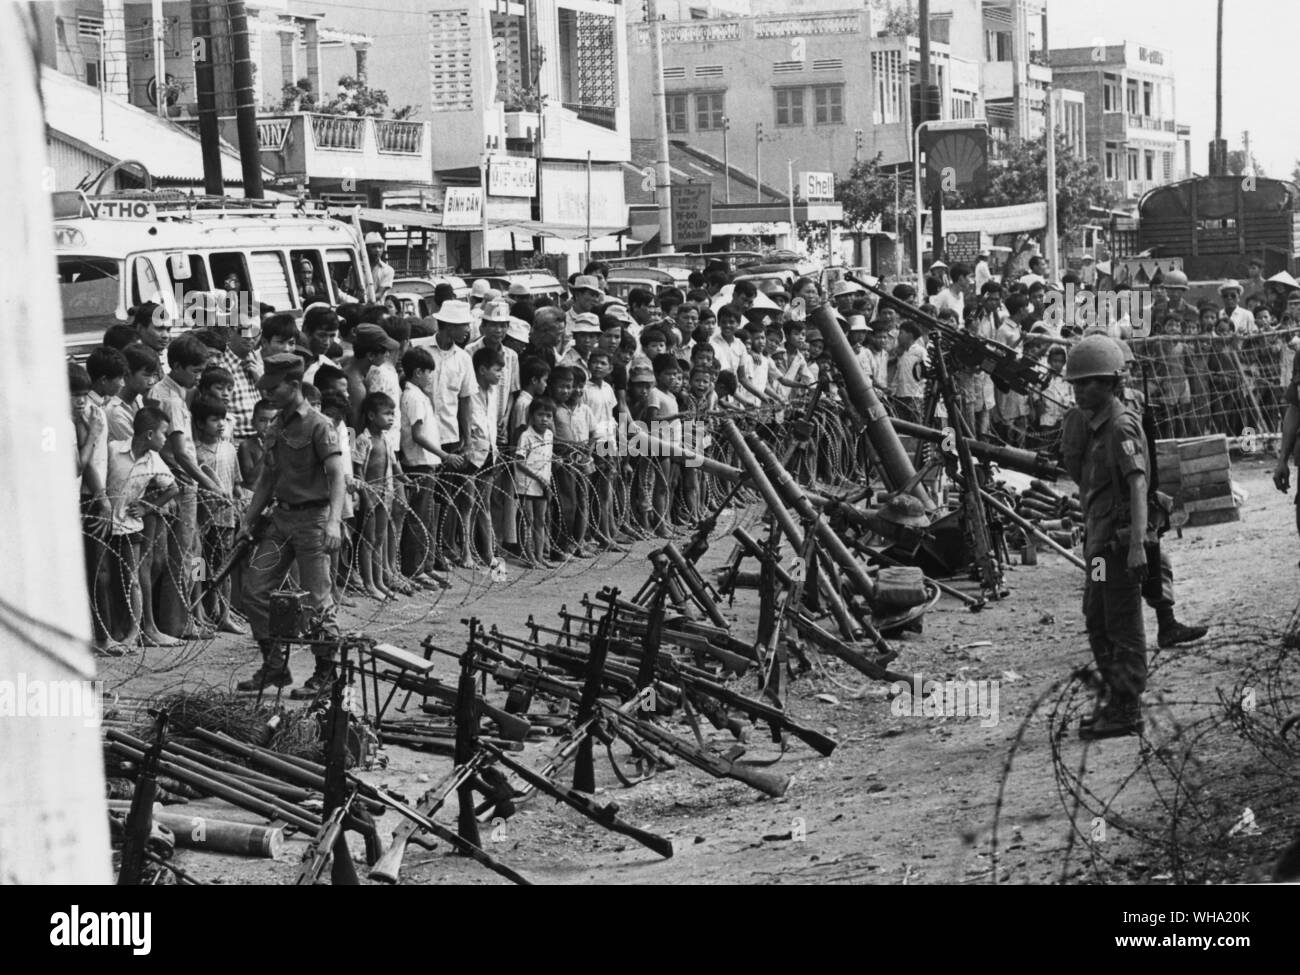 Vietnam war: Vietnaese soldiers behind a barbed wire barricade with civilians looking on. Stock Photo